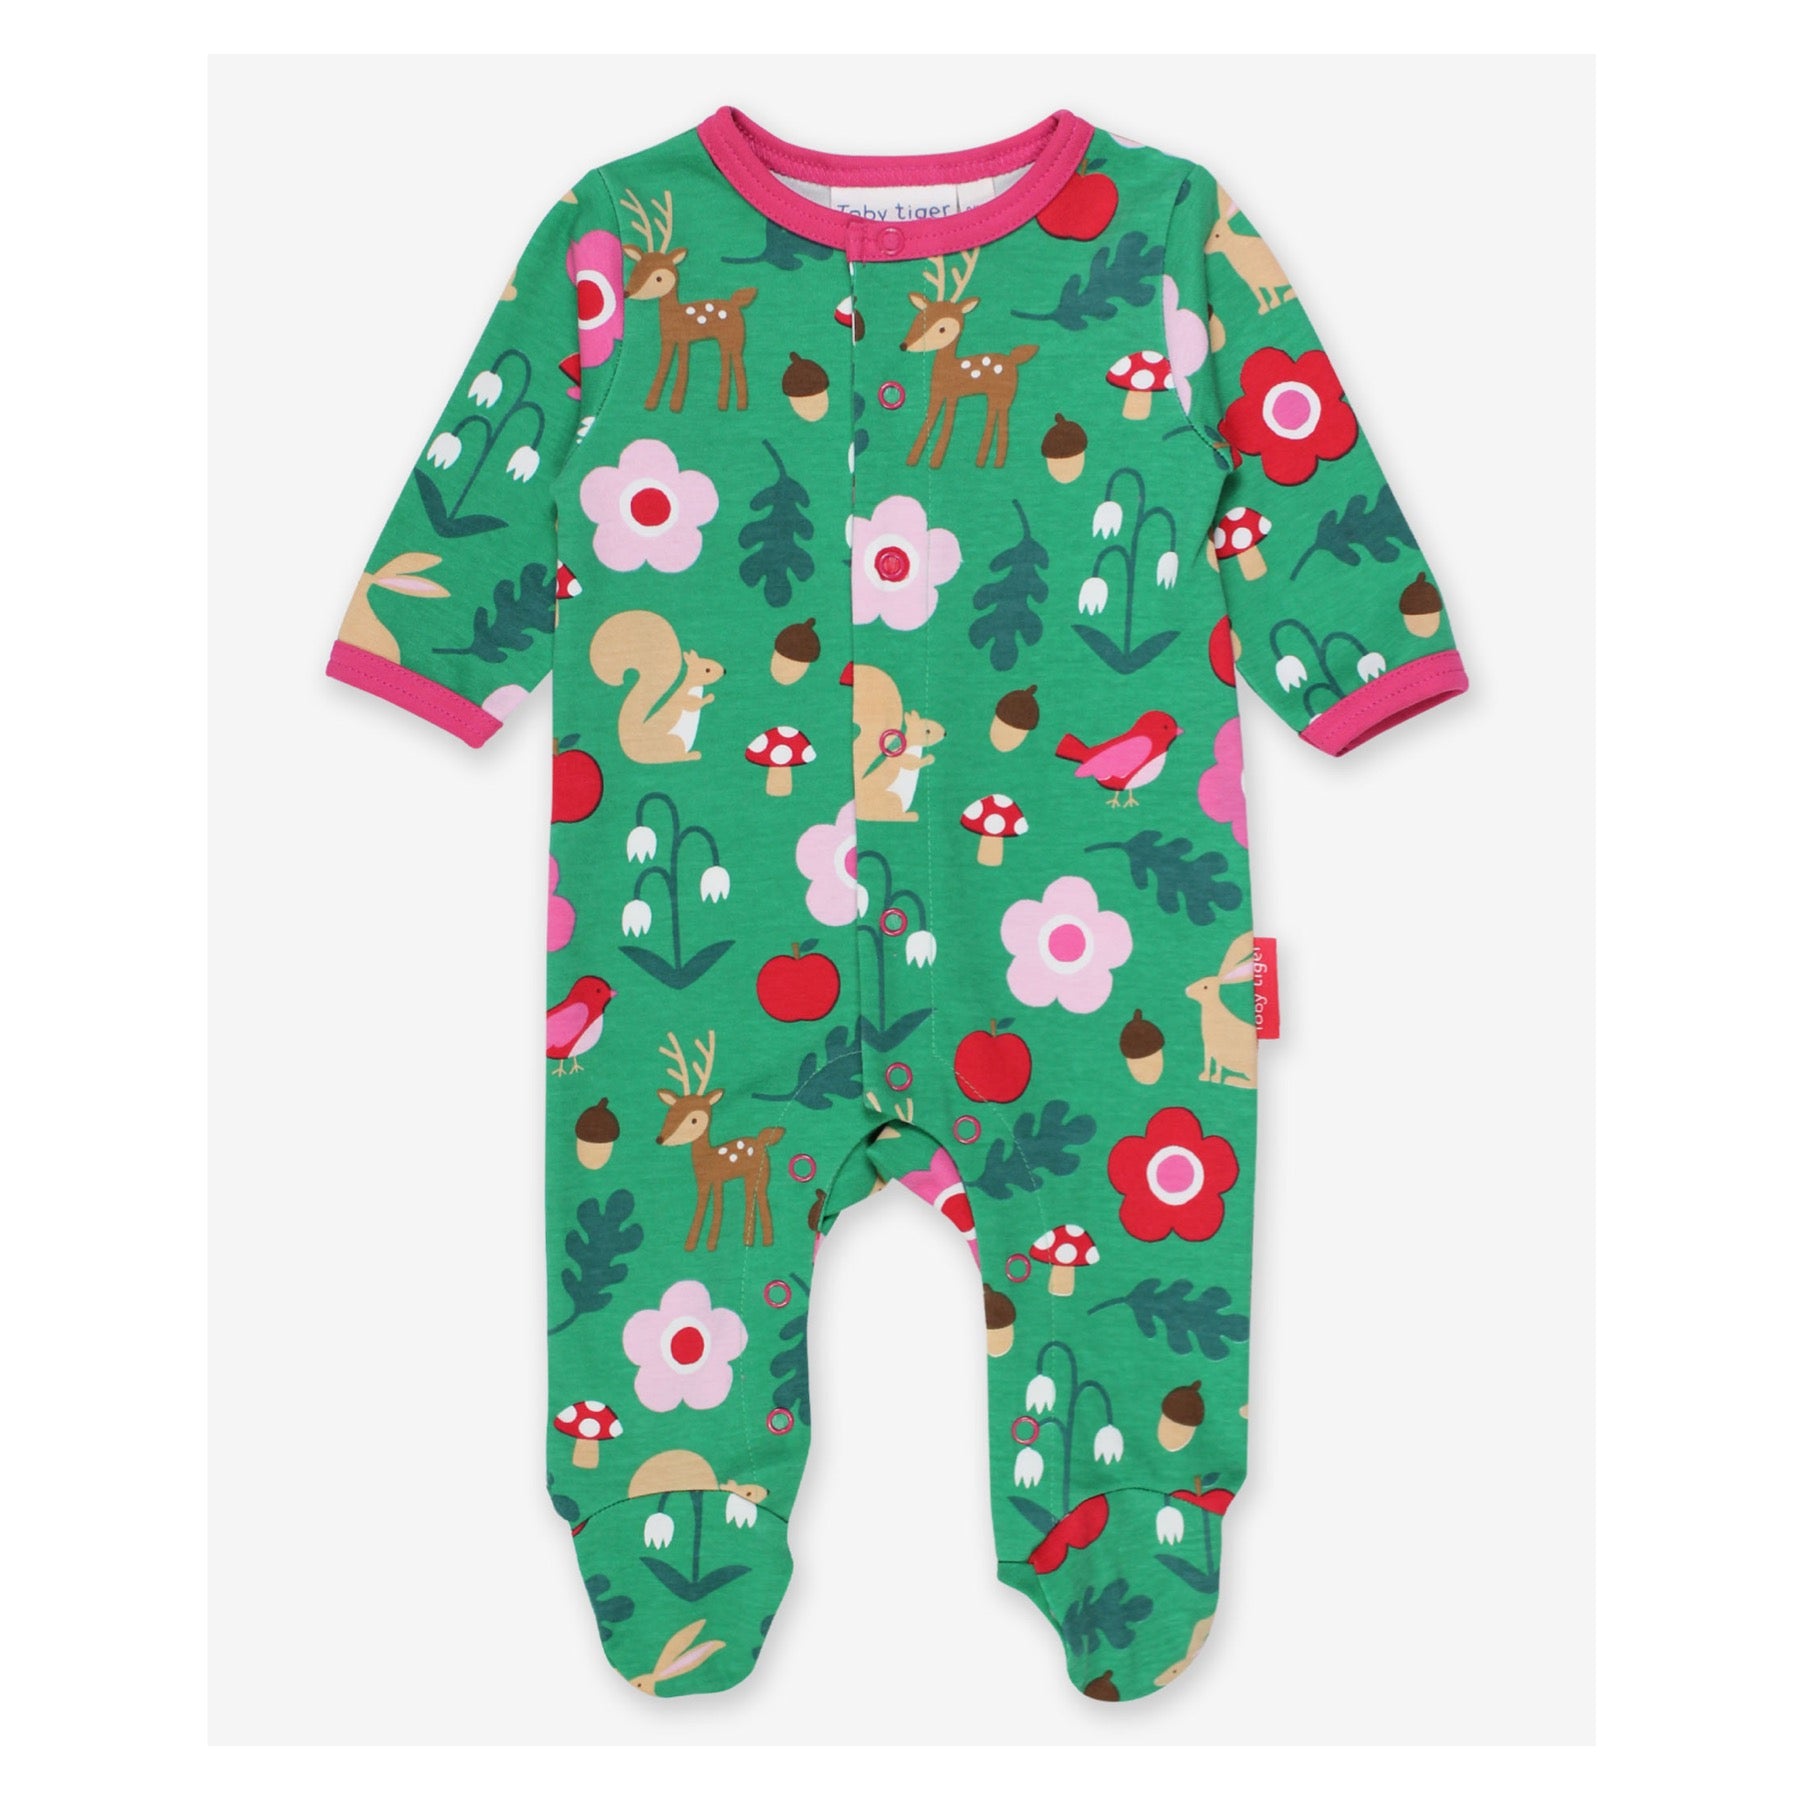 Toby Tiger Sleepsuit Forest Adventure